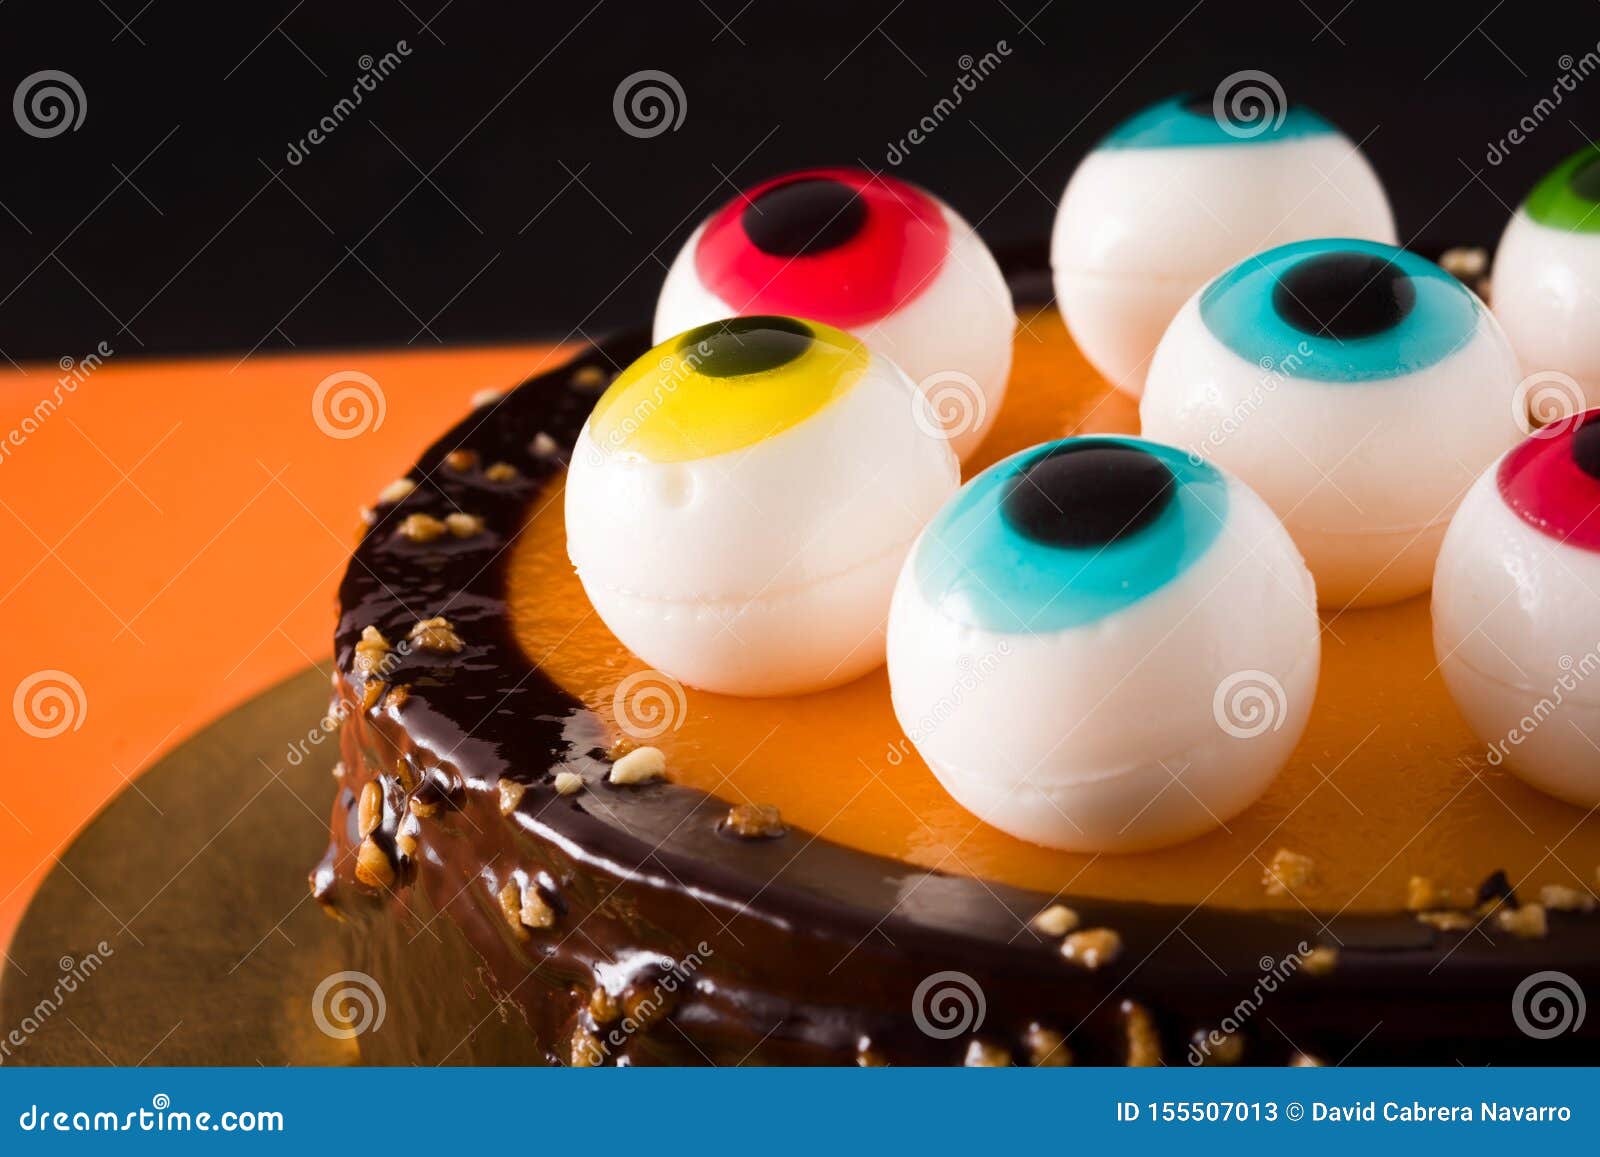 Halloween Cake with Candy Eyes Decoration on Orange and Black